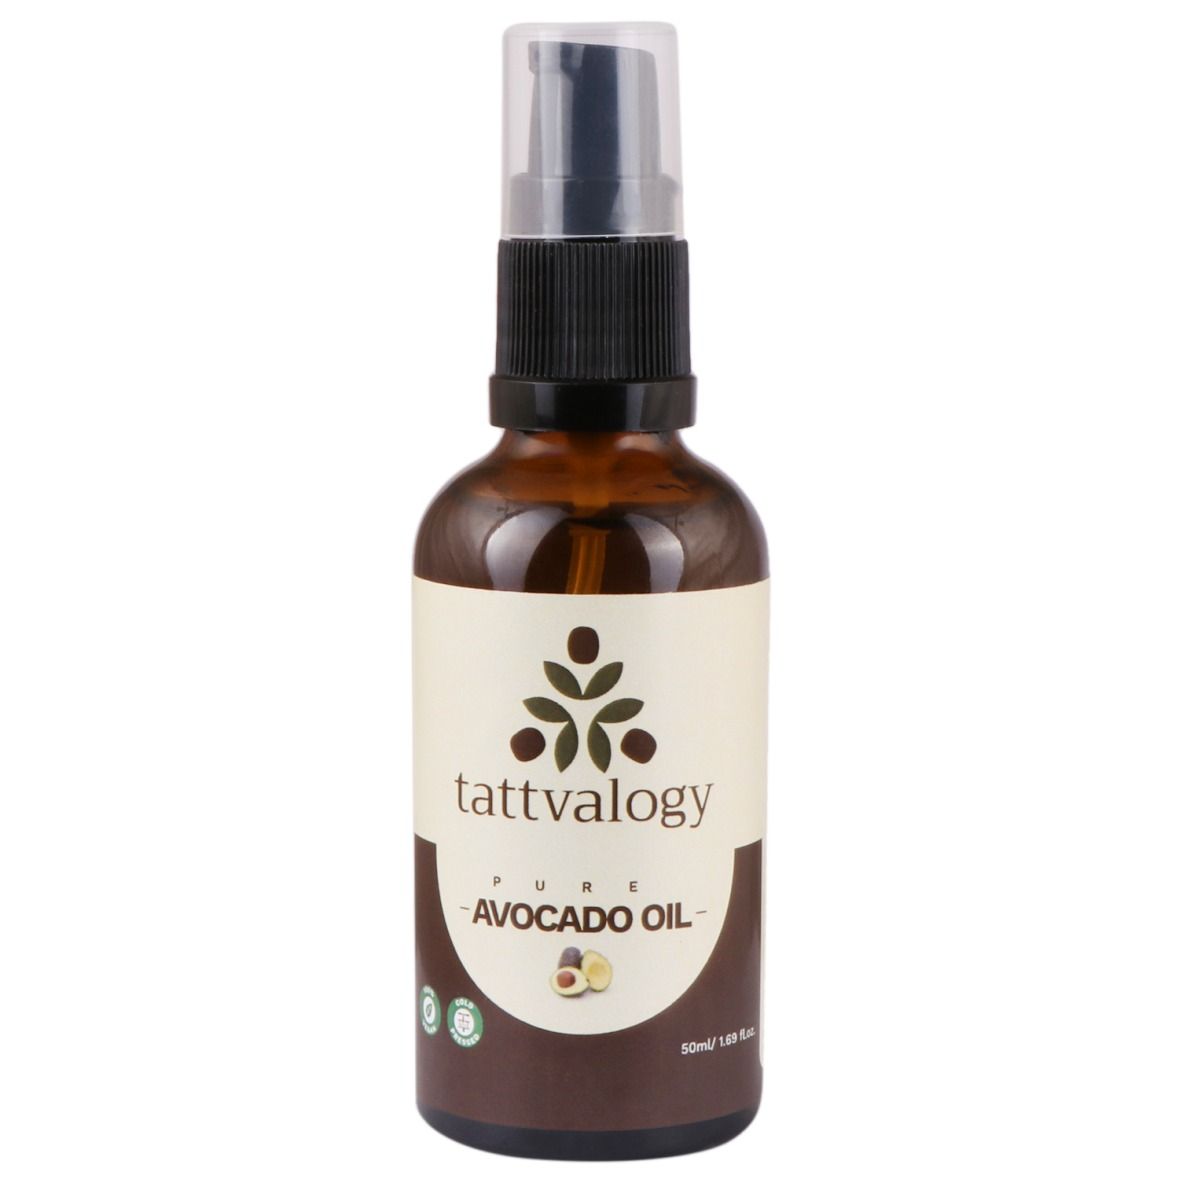 Tattvalogy Cold Pressed Avocado Carrier Oil